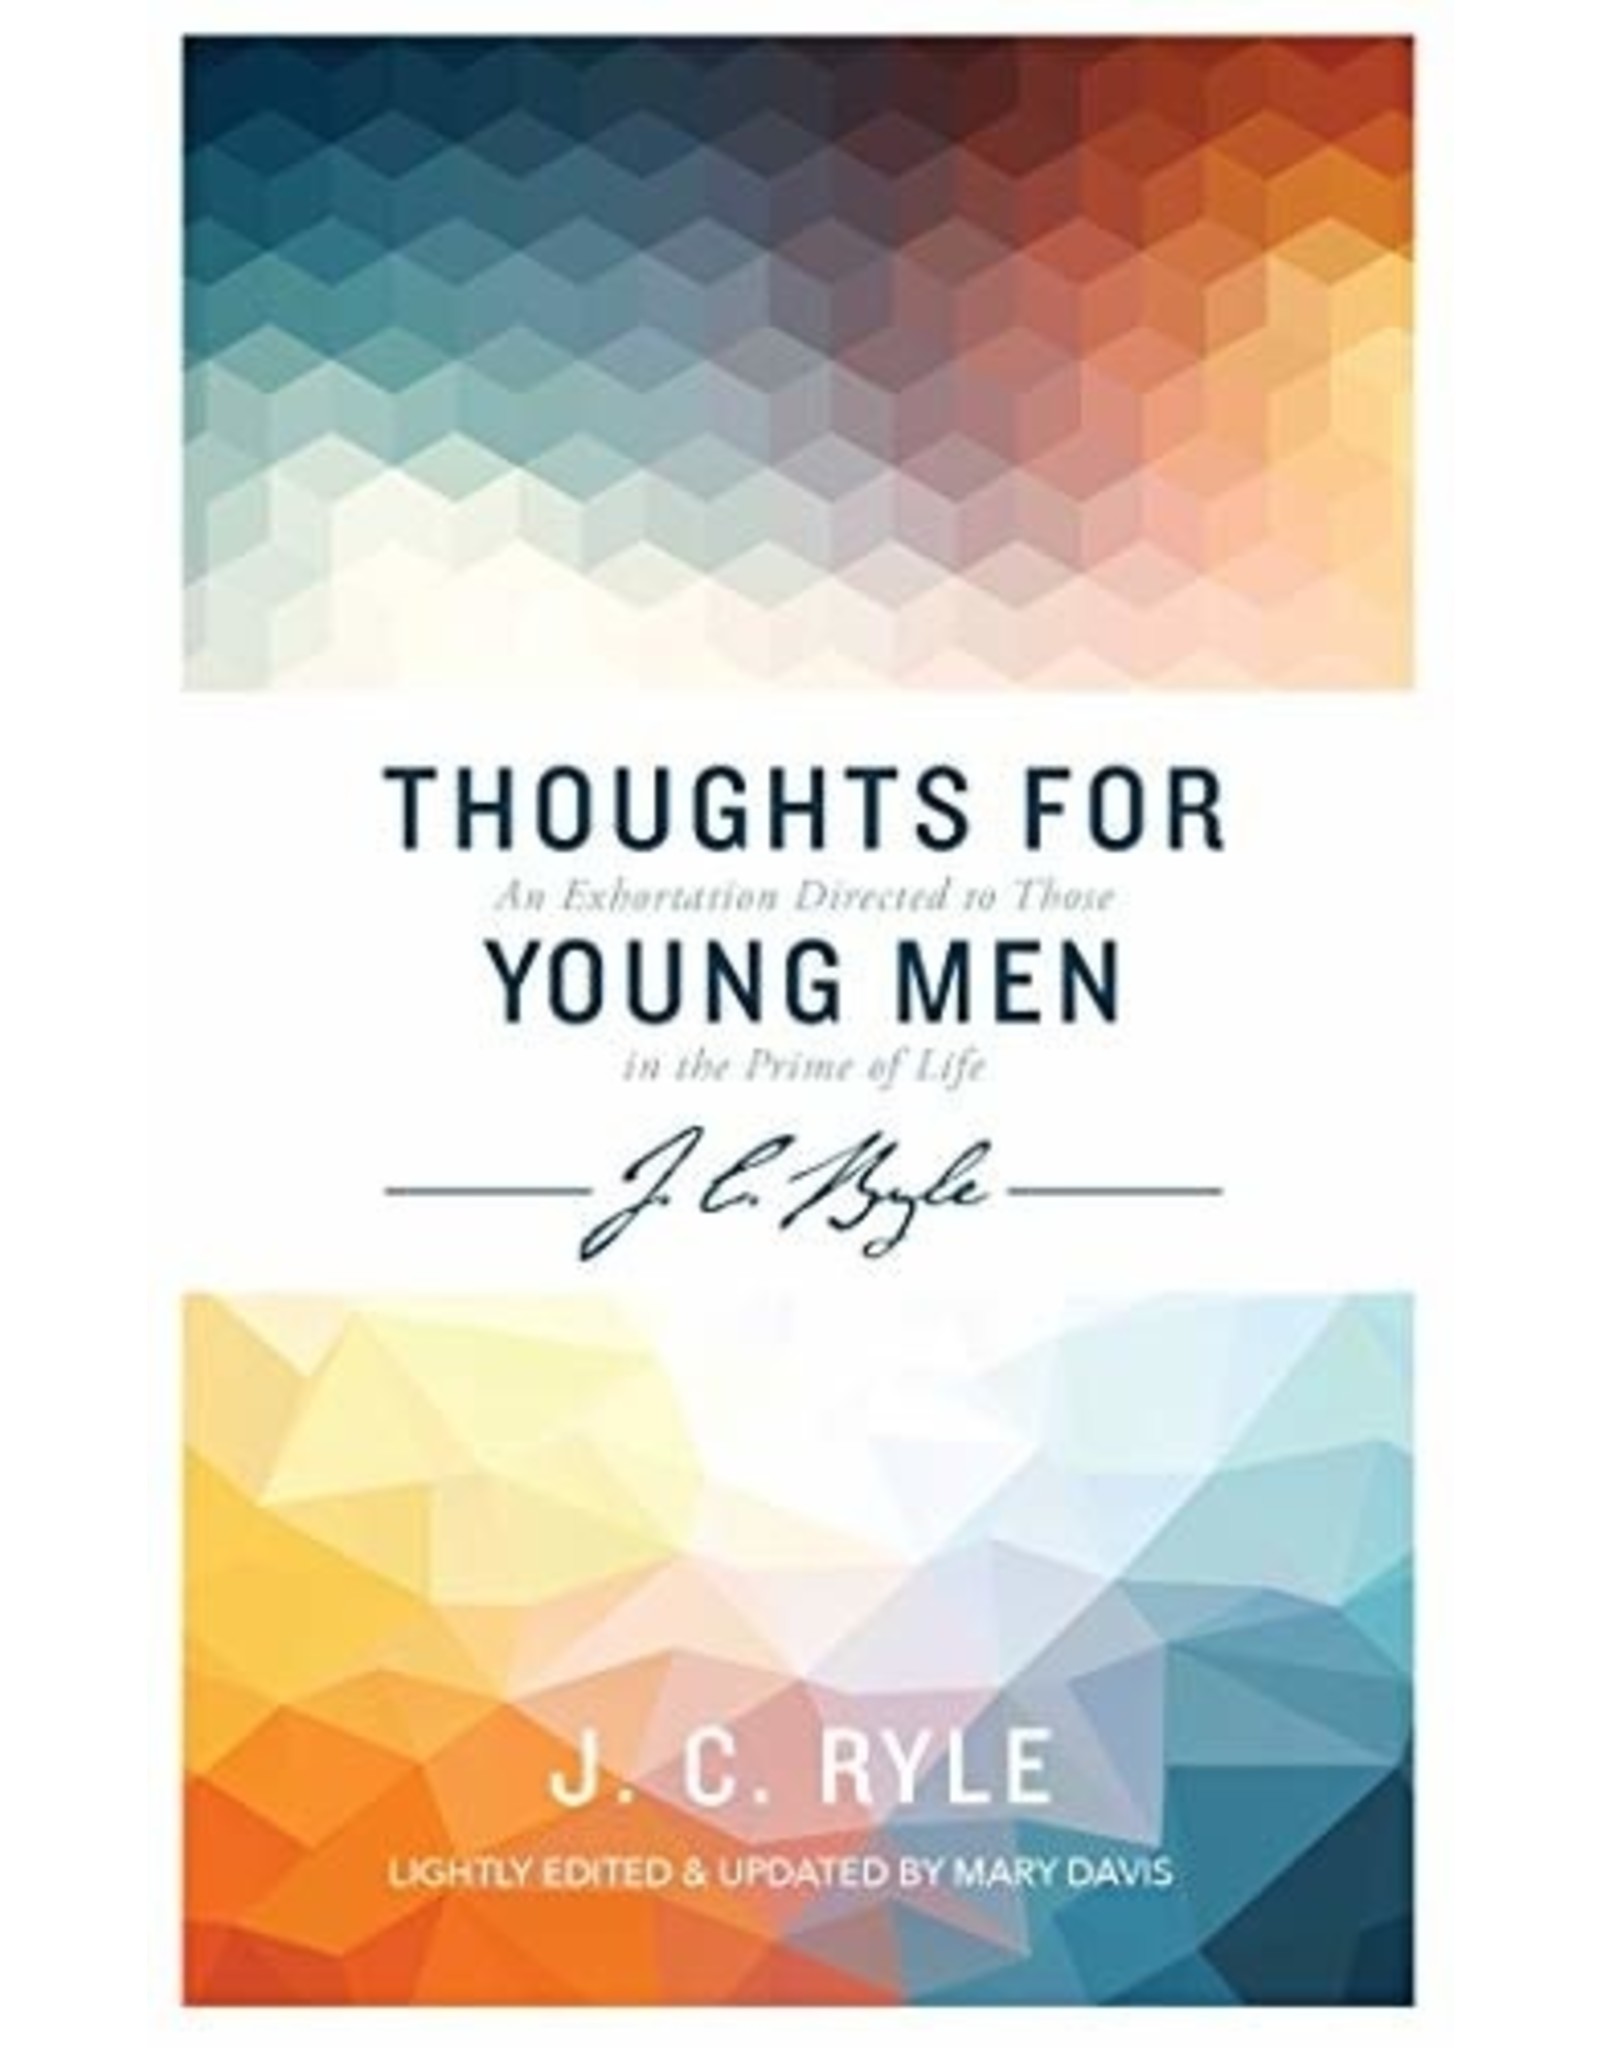 10ofThose / 10 Publishing Thoughts For Young Men (new)